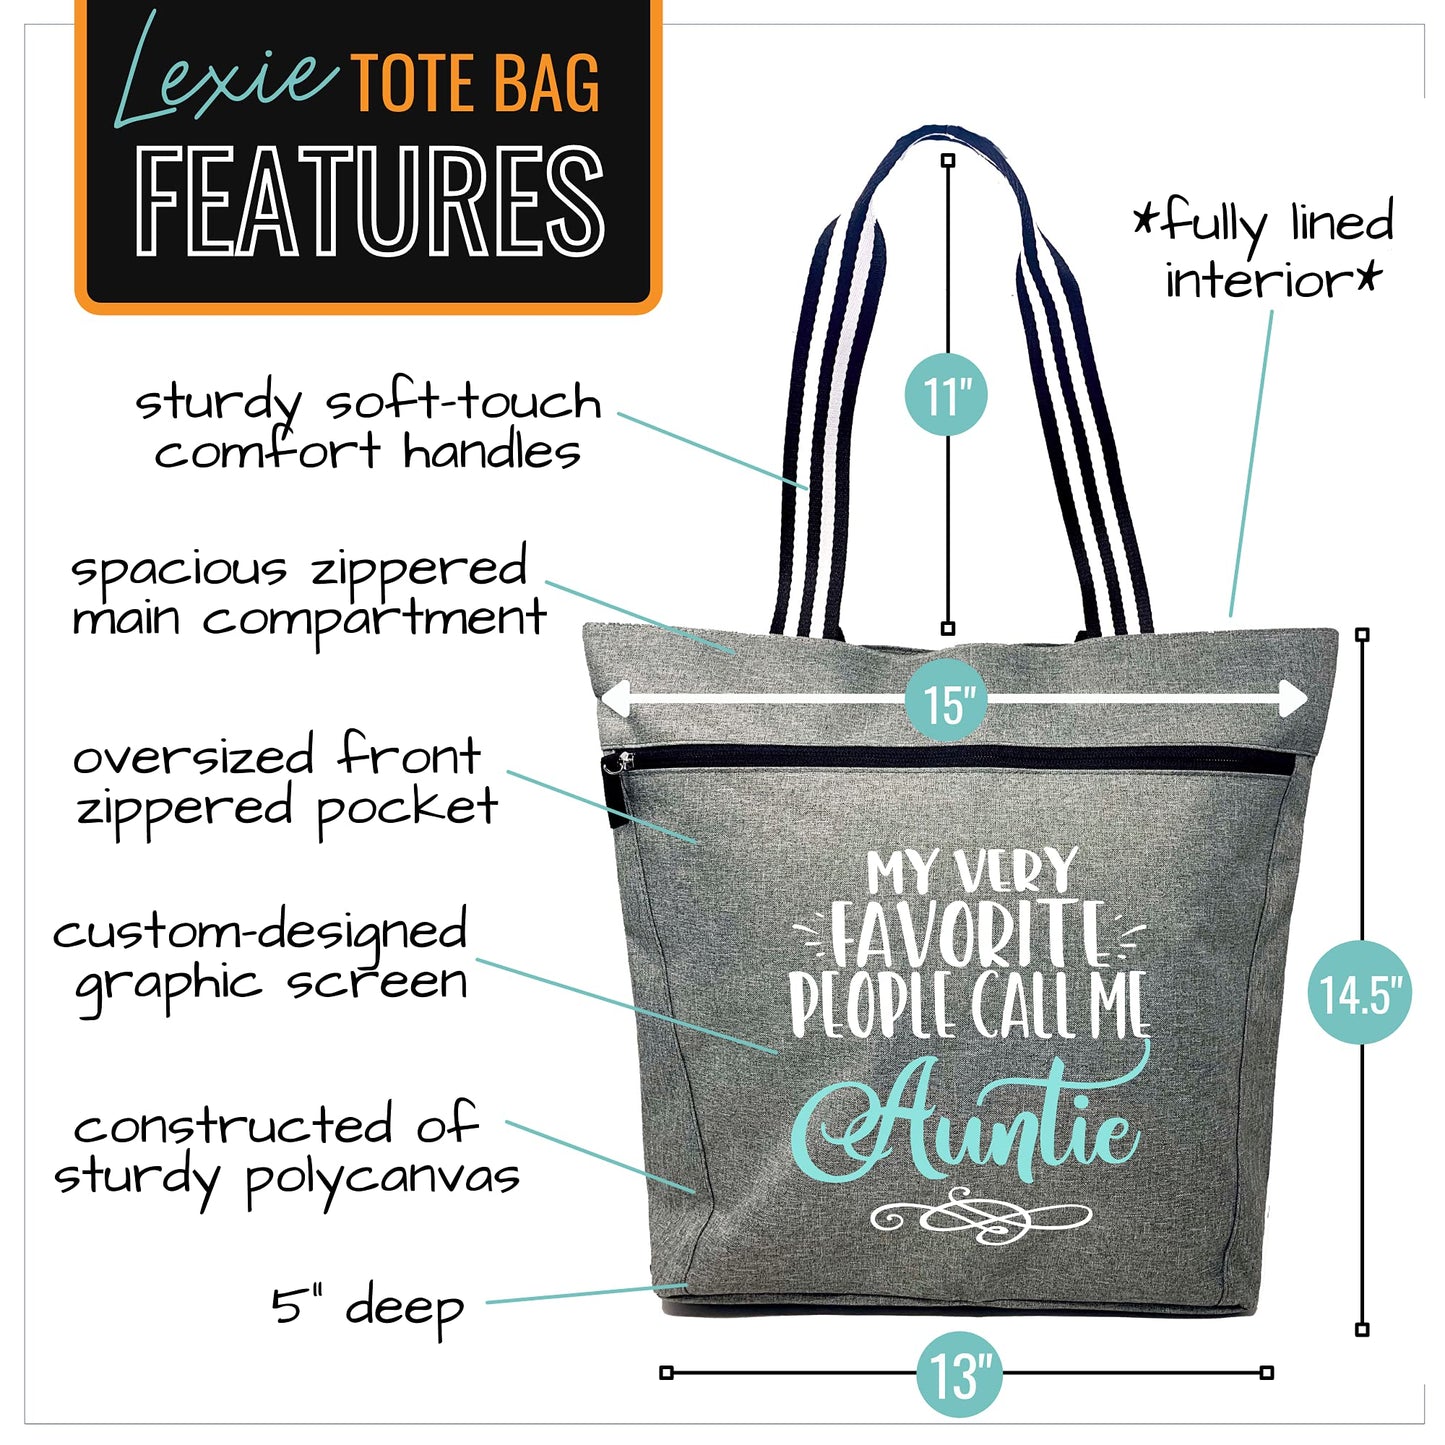 My Favorite People Call Me Auntie Lexie Gray Tote Bag for Aunts